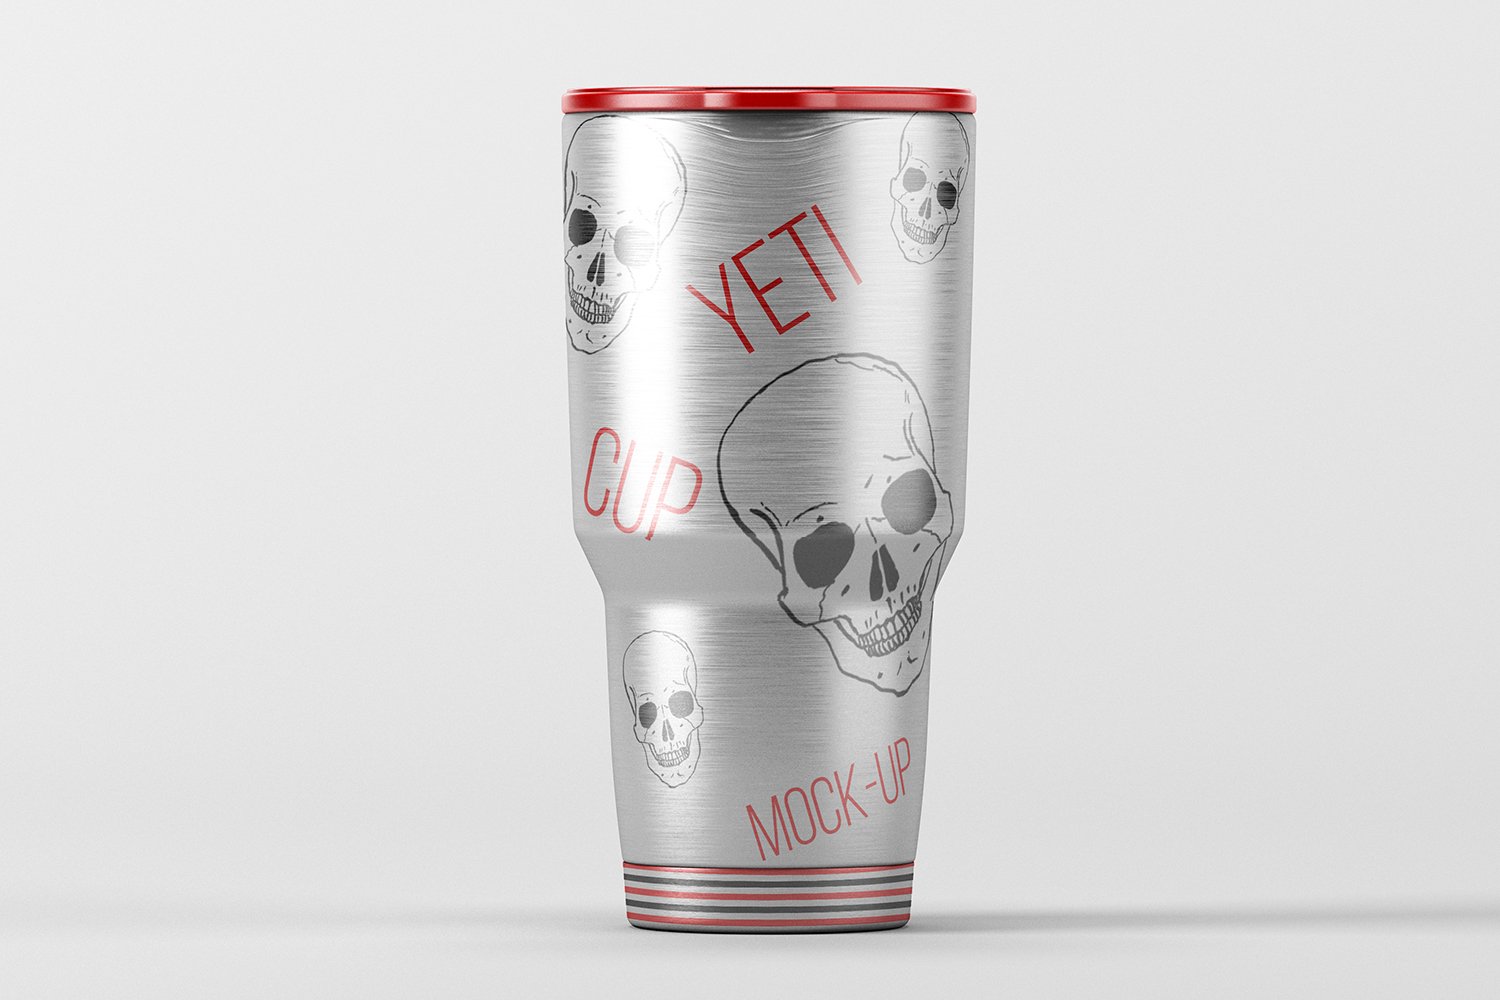 Classic metallic yeti cup with a skull illustration.